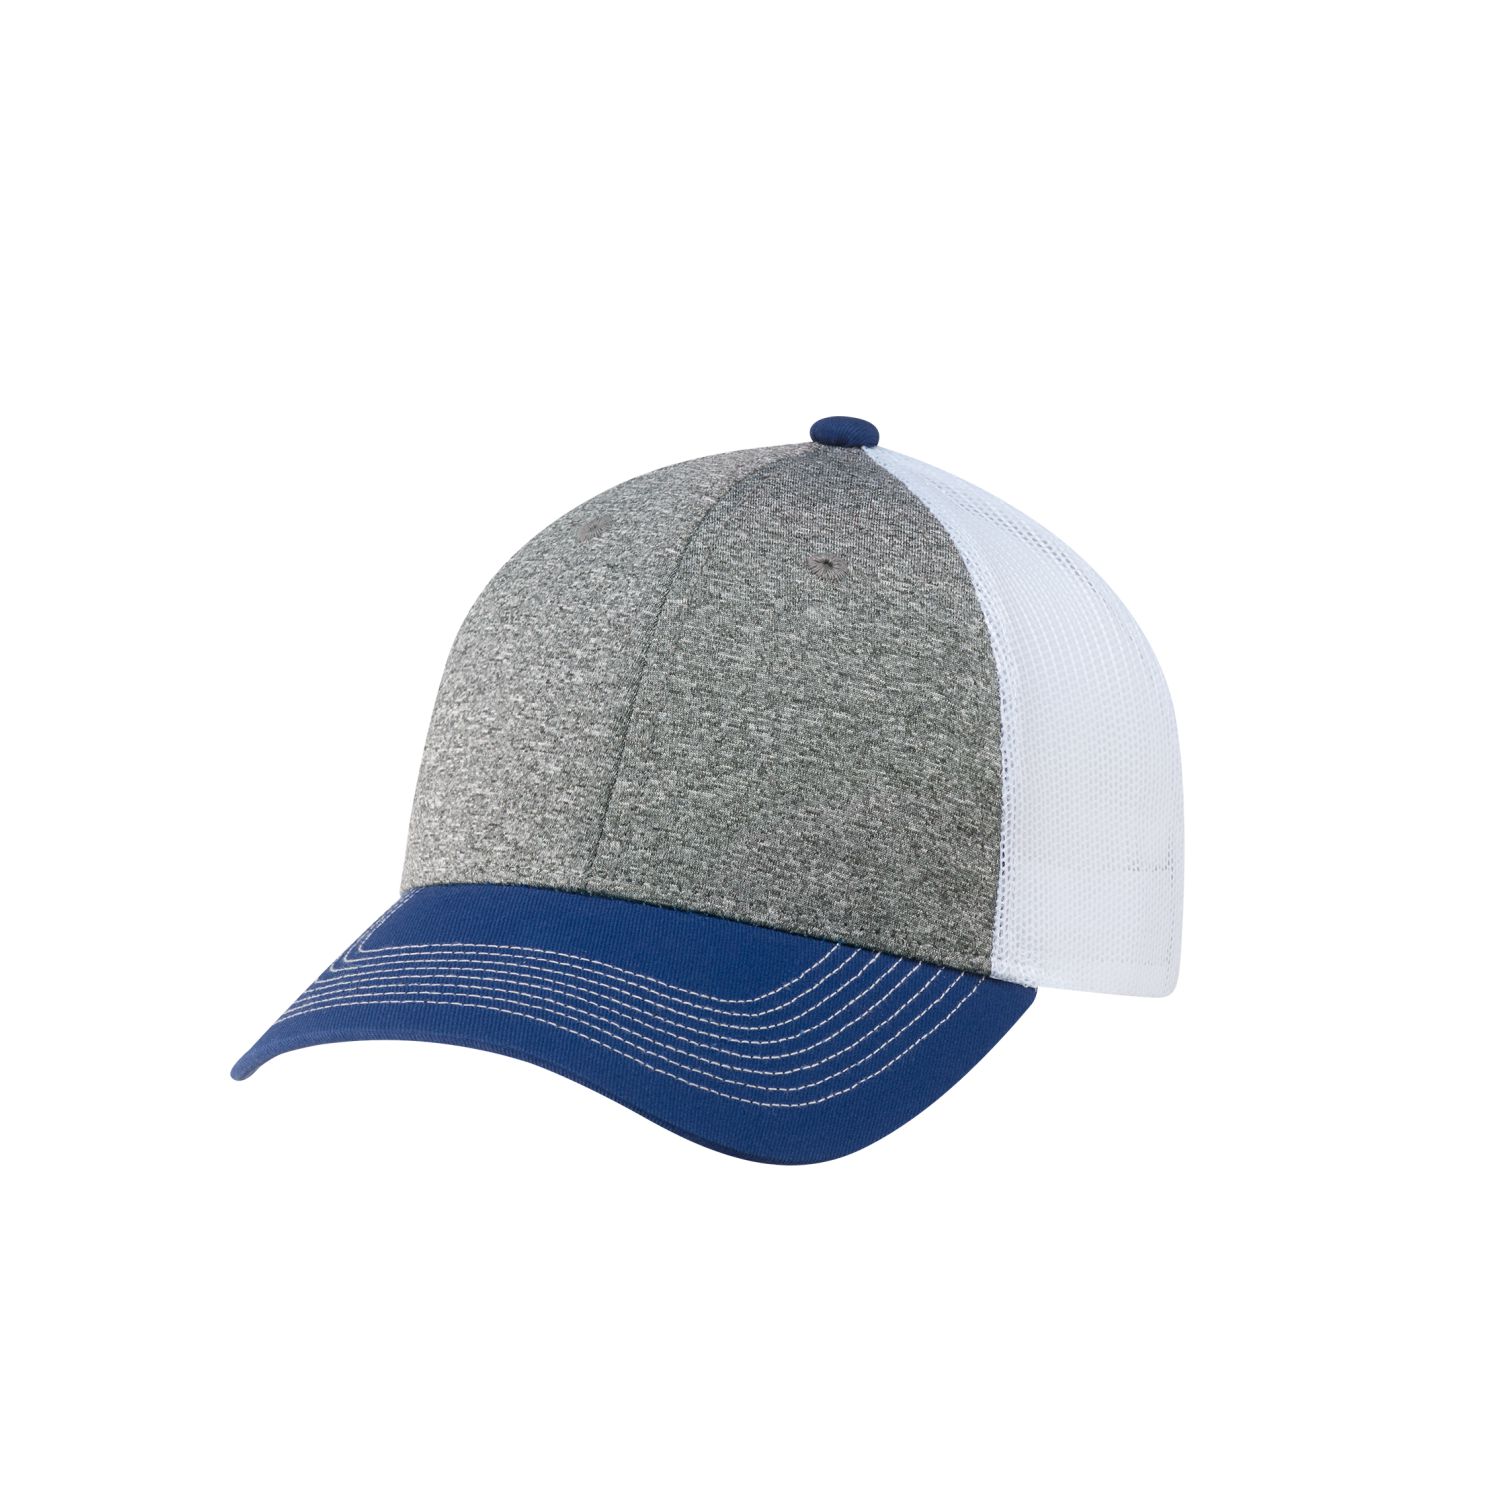 AJM Cotton Drill / Polyester Heather / Nylon Mesh 6 Panel Constructed Full-Fit Hat (Mesh Back) #4G645M Royal Blue / Charcoal / White